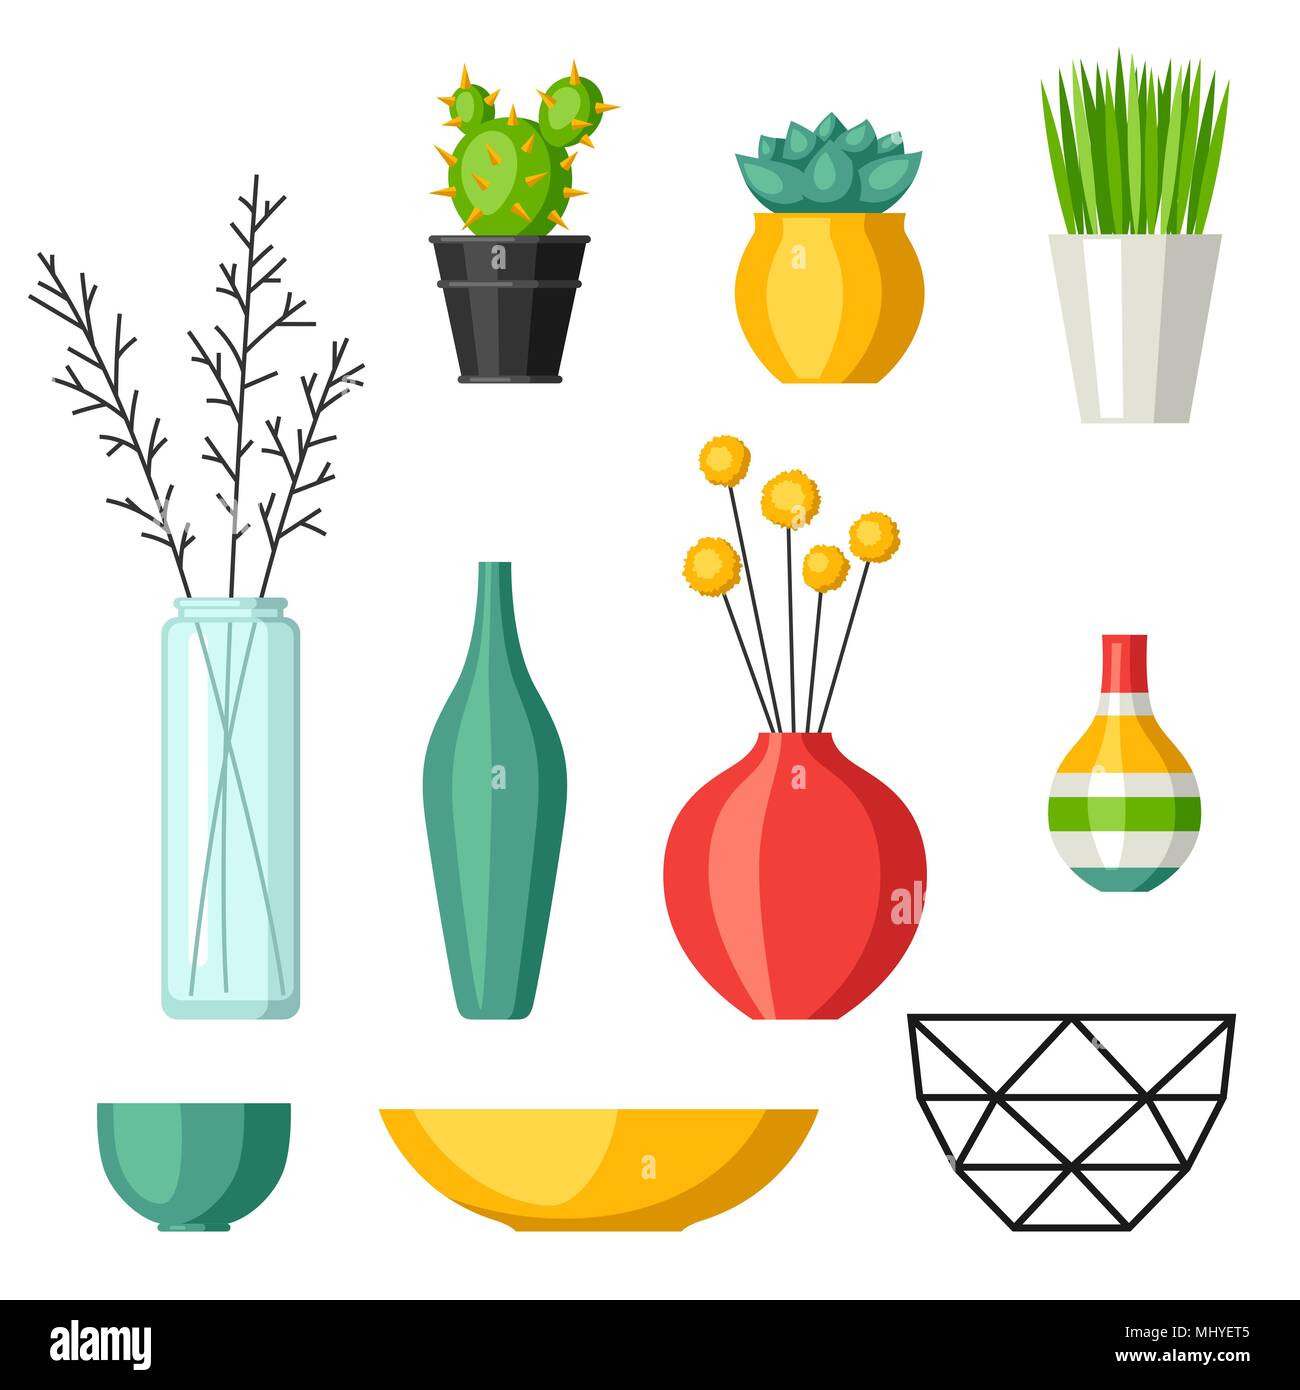 Home decoration vases flower pots, succulents and cacti Stock Vector